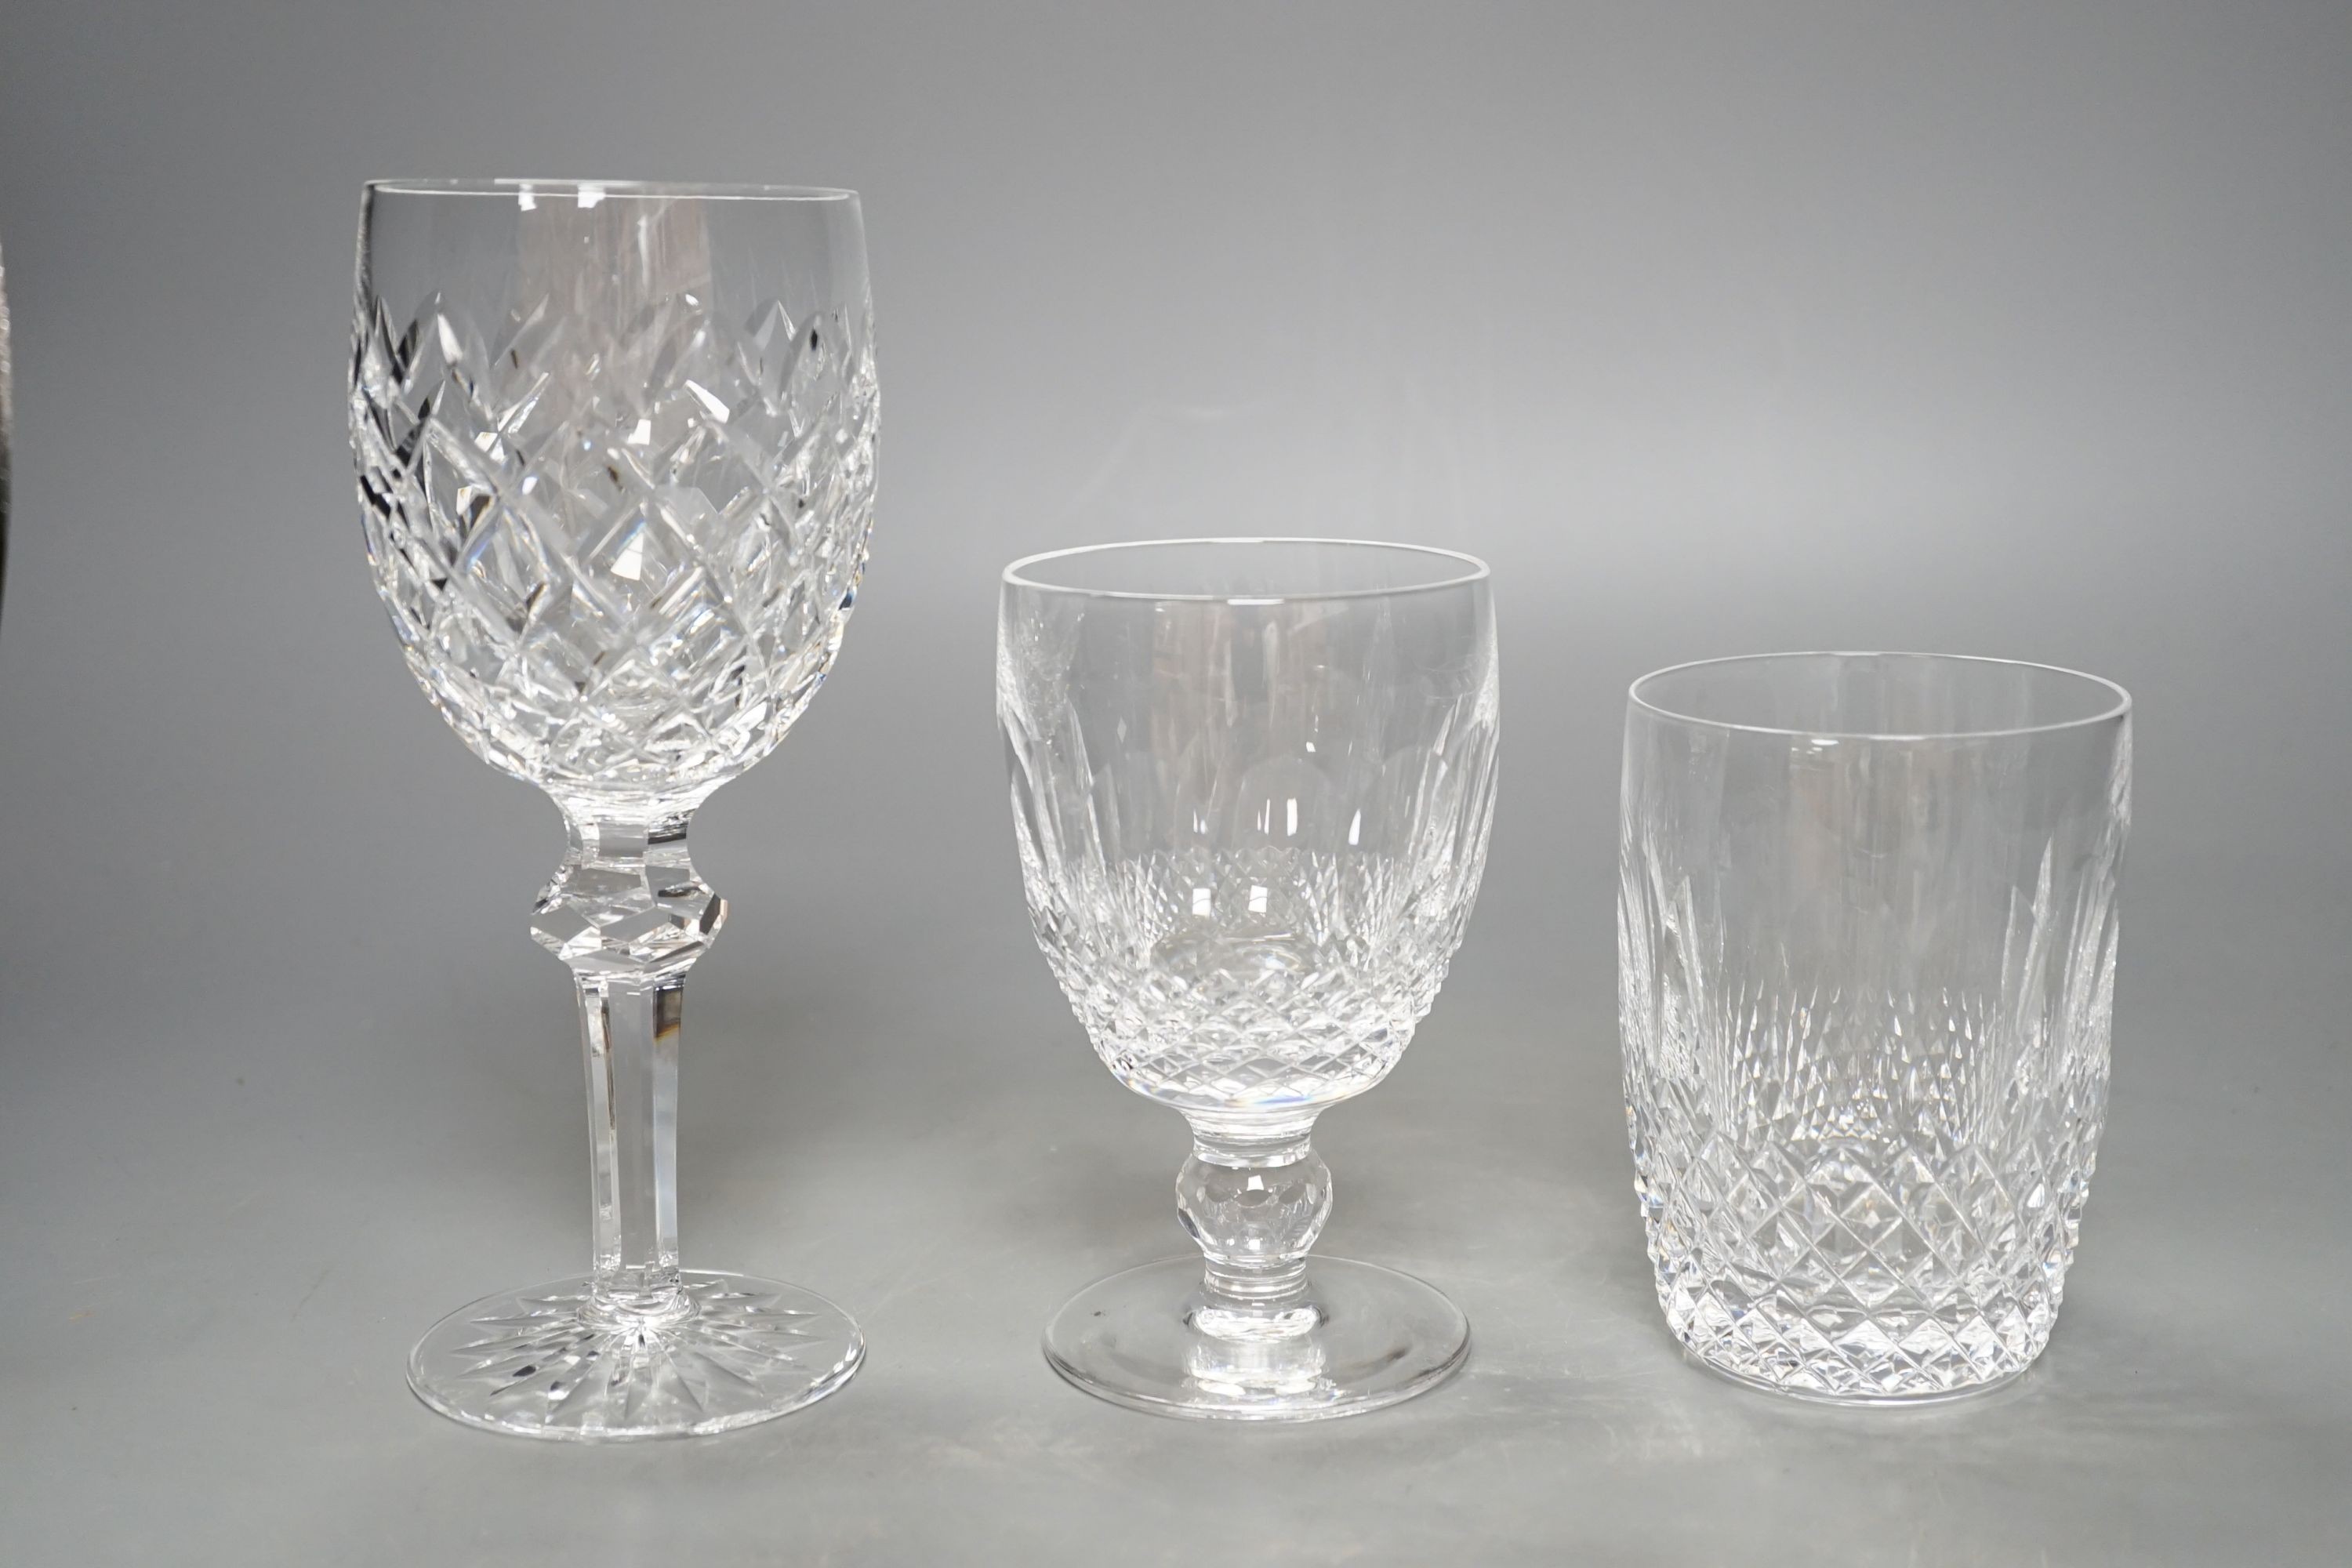 A set of eighteen Waterford cut crystal low goblets and tumblers and twelve further Waterford cut crystal wine glasses in a different pattern